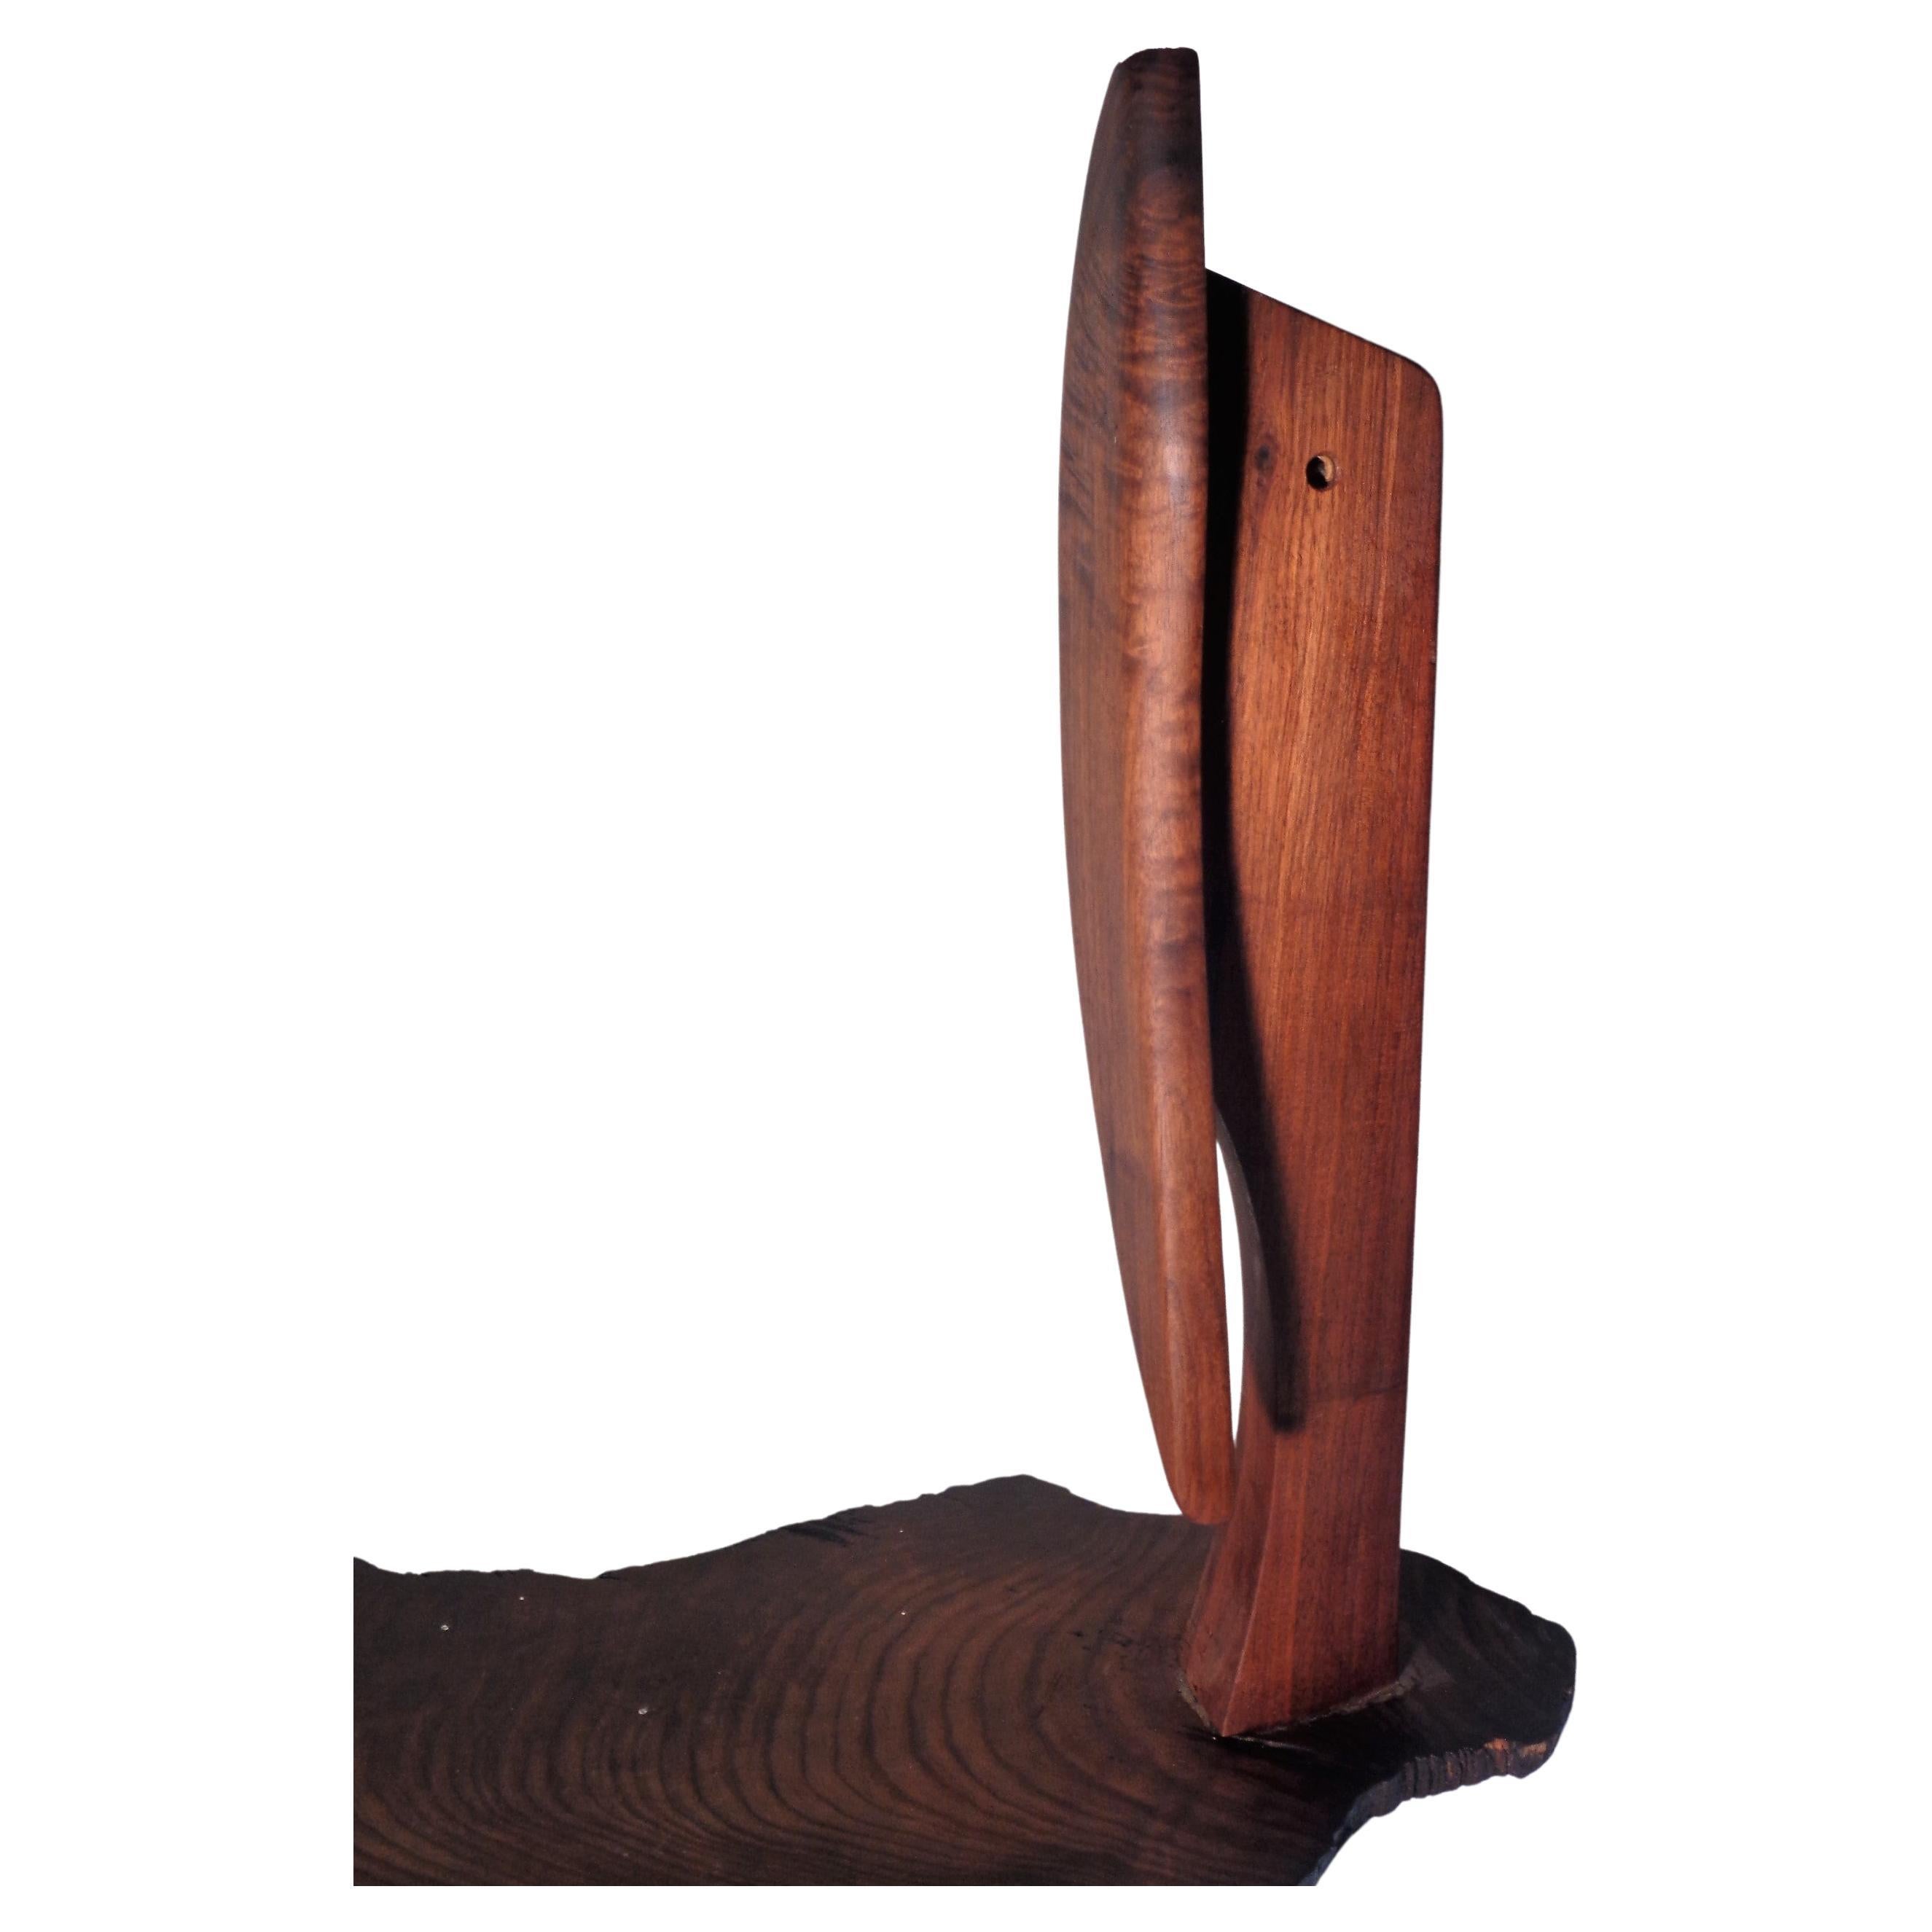 20th Century American Studio Craft Movement Modernist Abstract Wood Sculpture, 1970-1980 For Sale